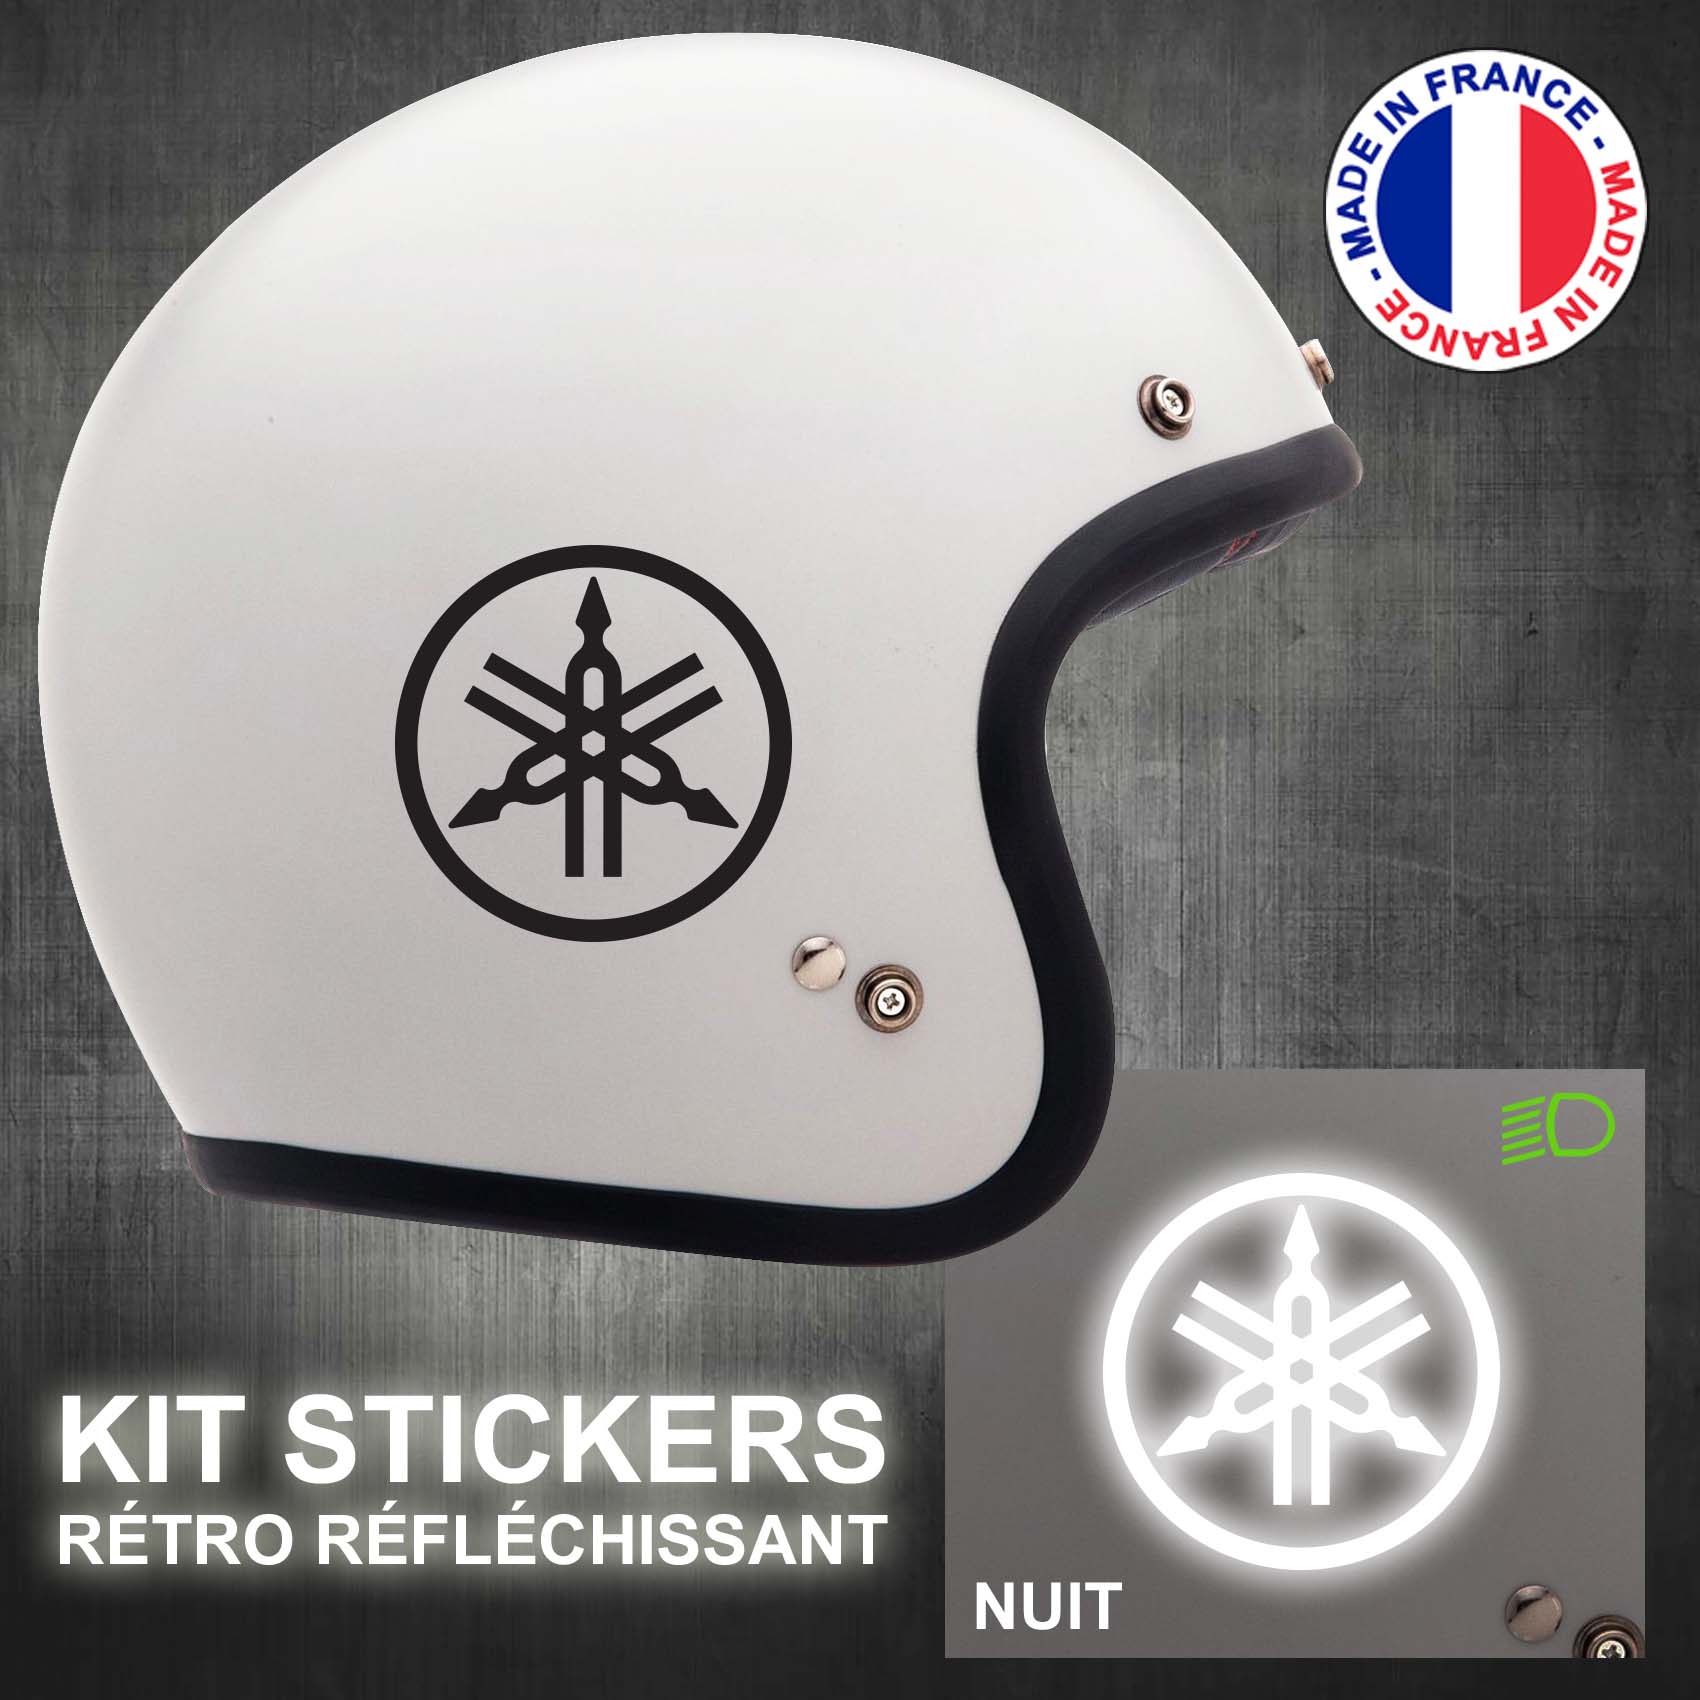 stickers-casque-moto-yamaha-ref3-retro-reflechissant-autocollant-blanc-moto-velo-tuning-racing-route-sticker-casques-adhesif-scooter-nuit-securite-decals-personnalise-personnalisable-min